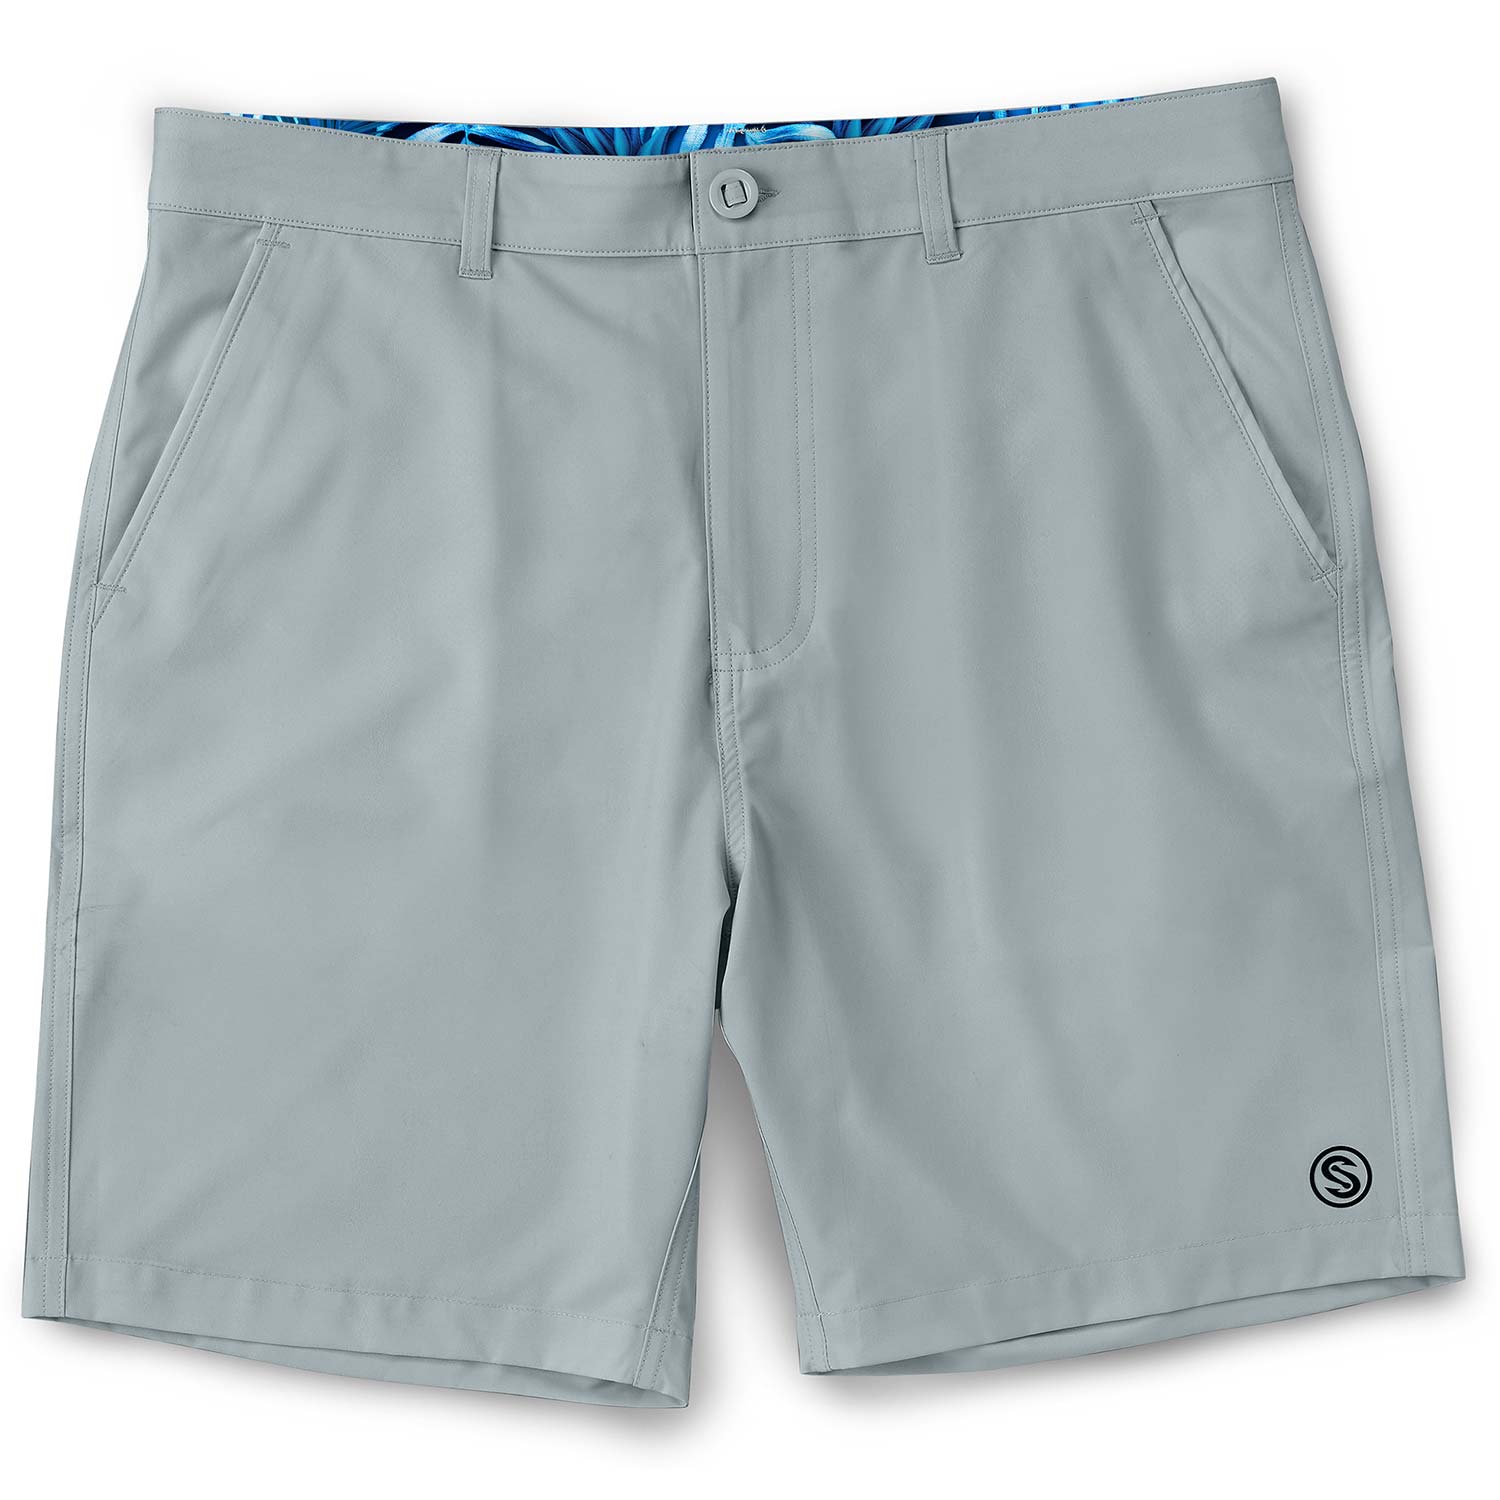 SCALES Men's All Tides Shorts